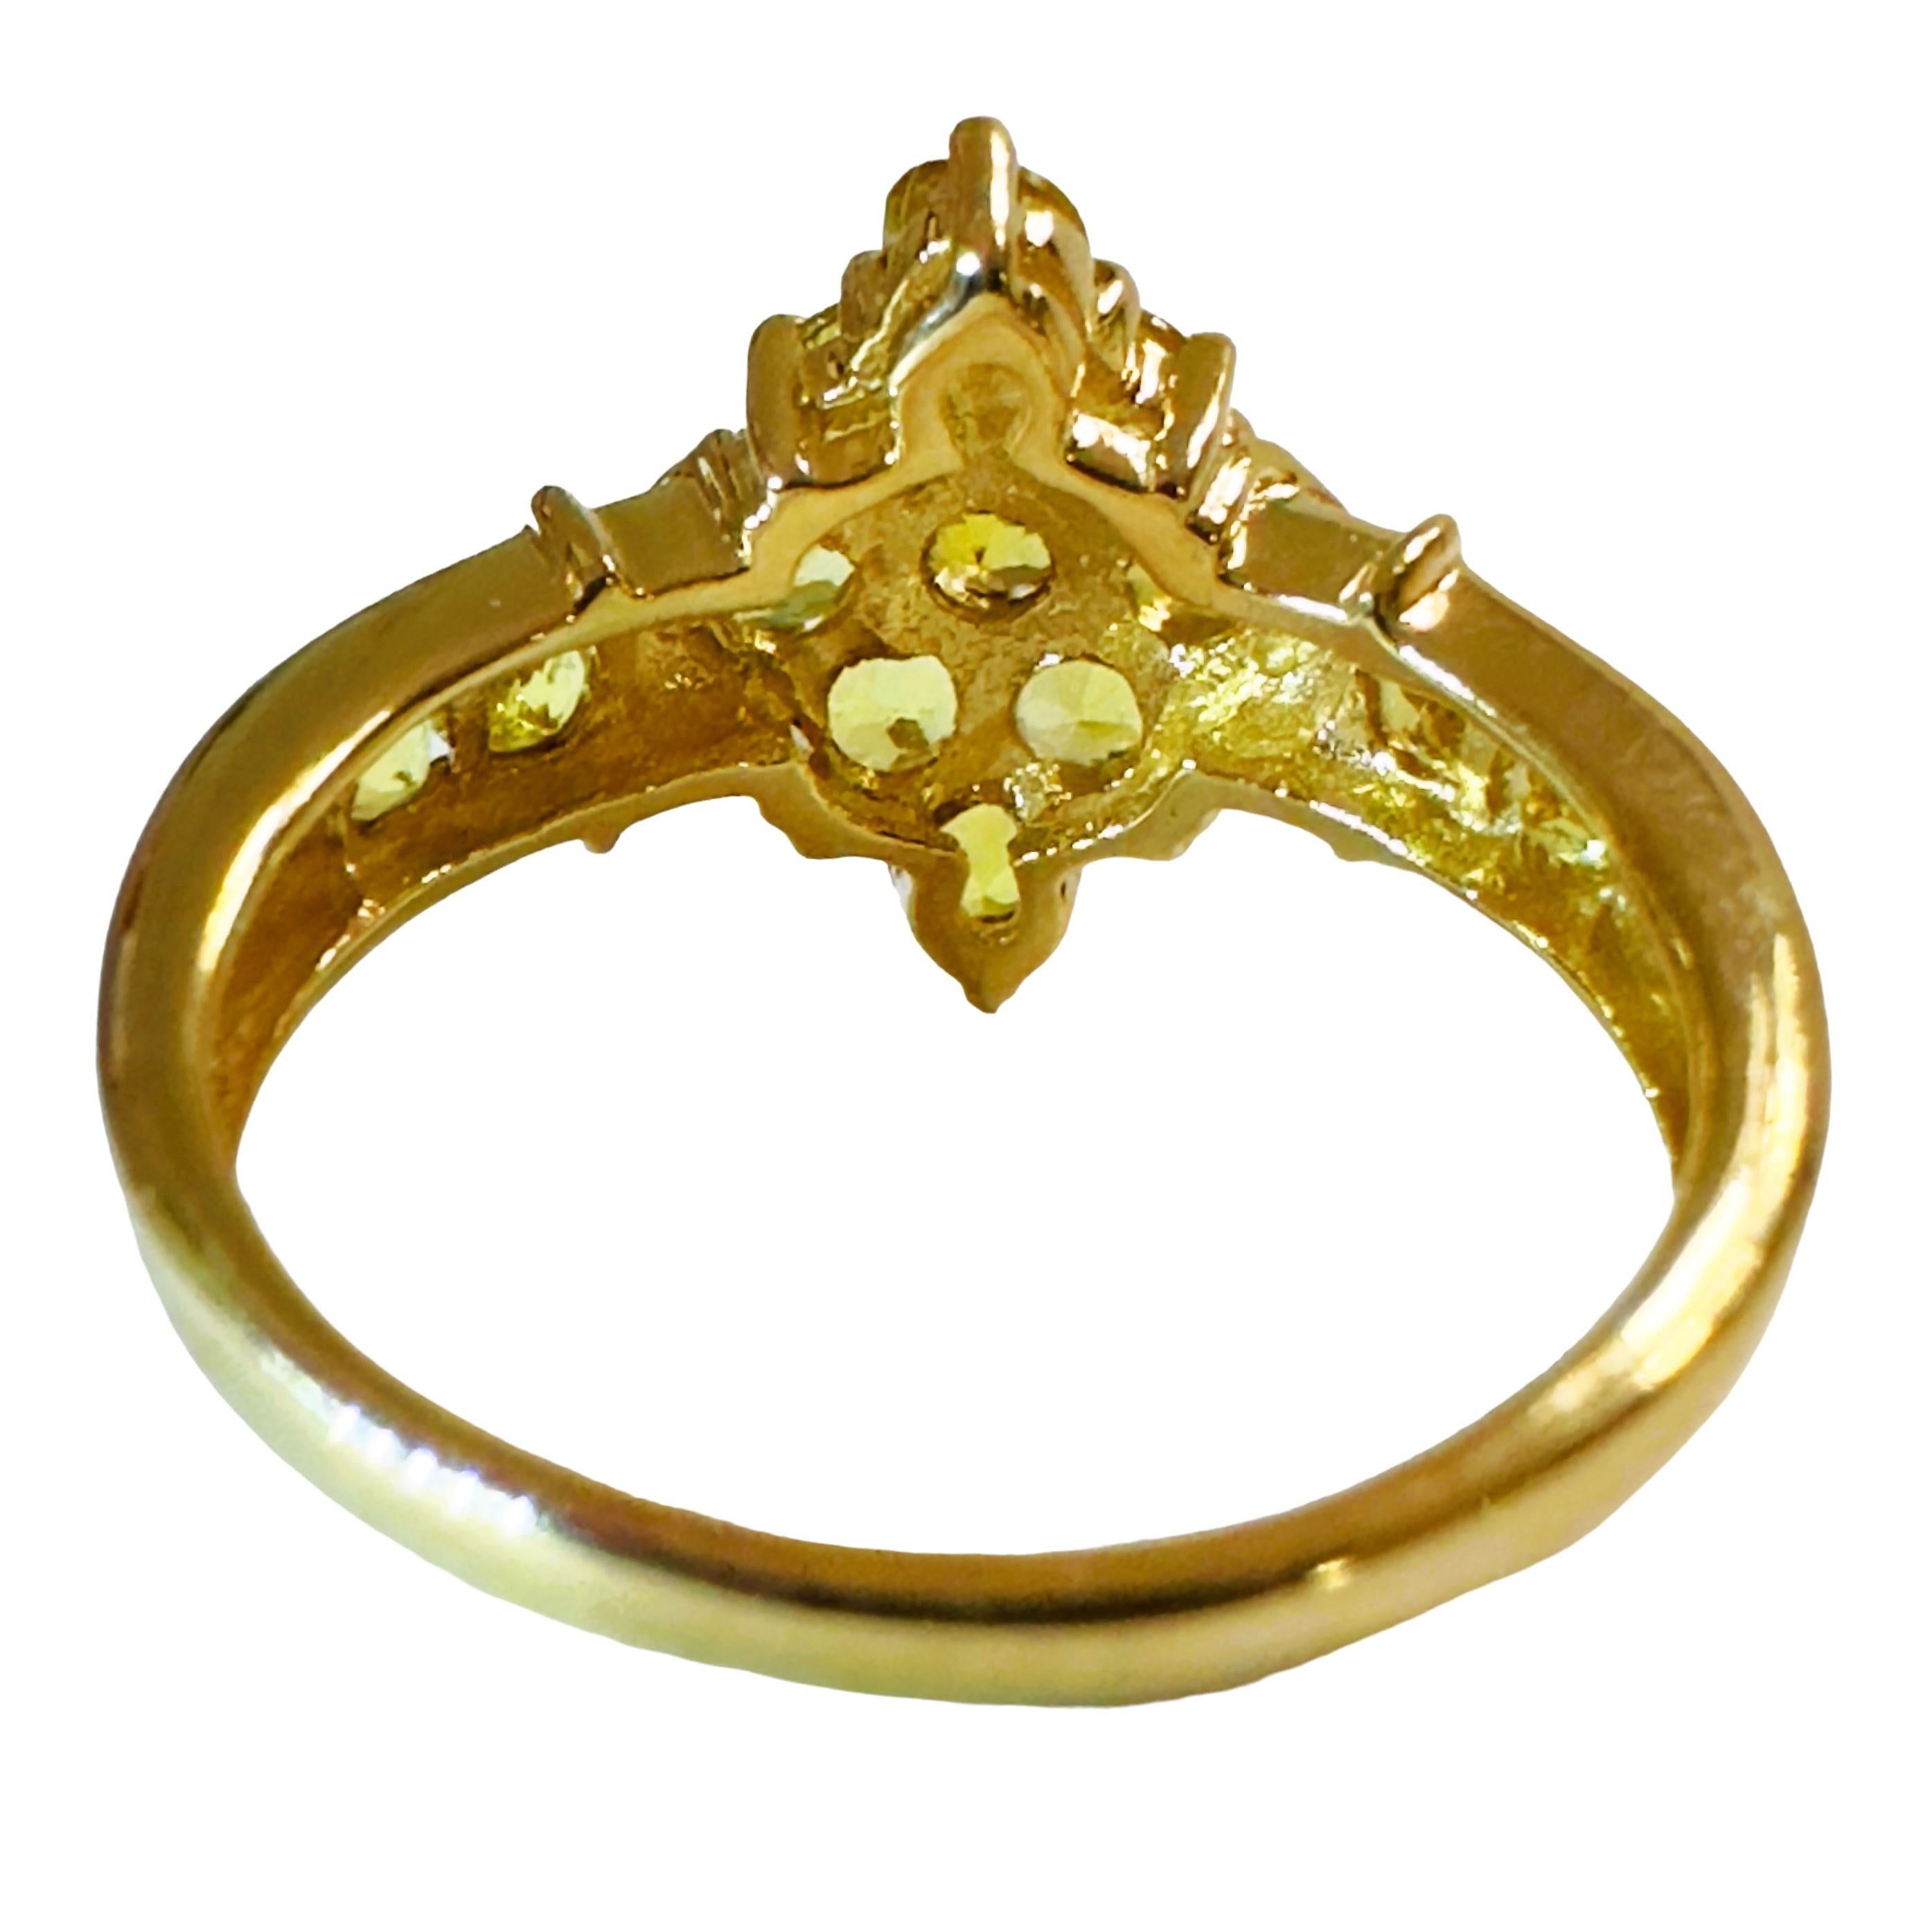 14K Yellow Gold Lemon - Green Citrine Ring Size 6.75 In Excellent Condition For Sale In Eagan, MN